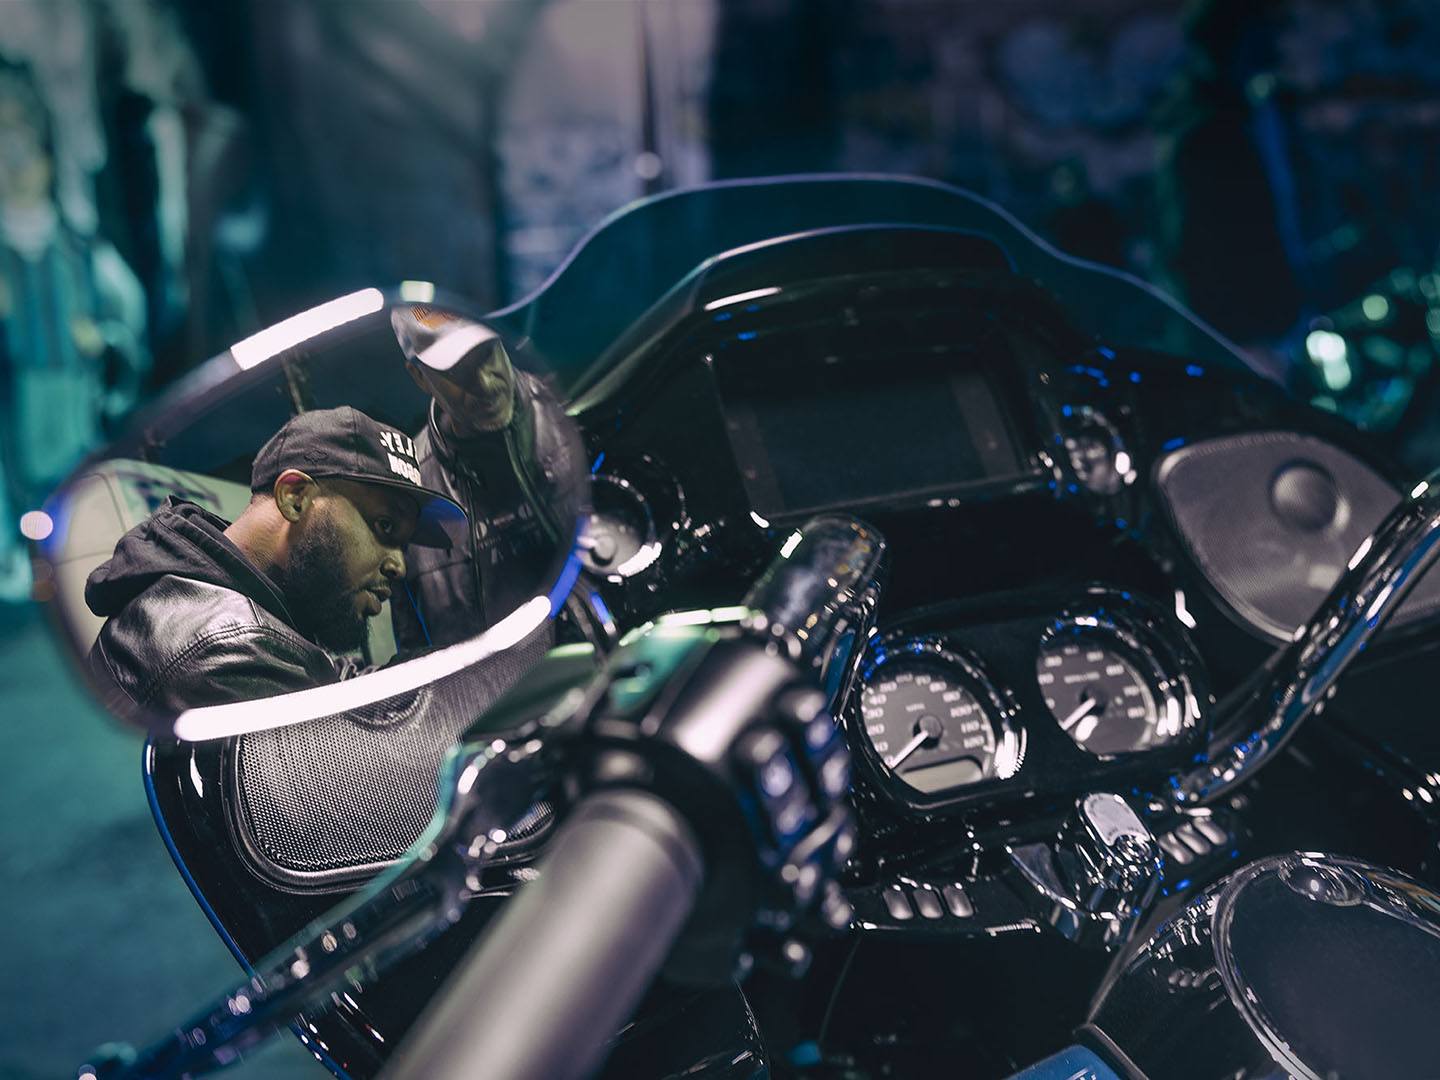 2023 Harley-Davidson Road Glide® 3 in Franklin, Tennessee - Photo 4